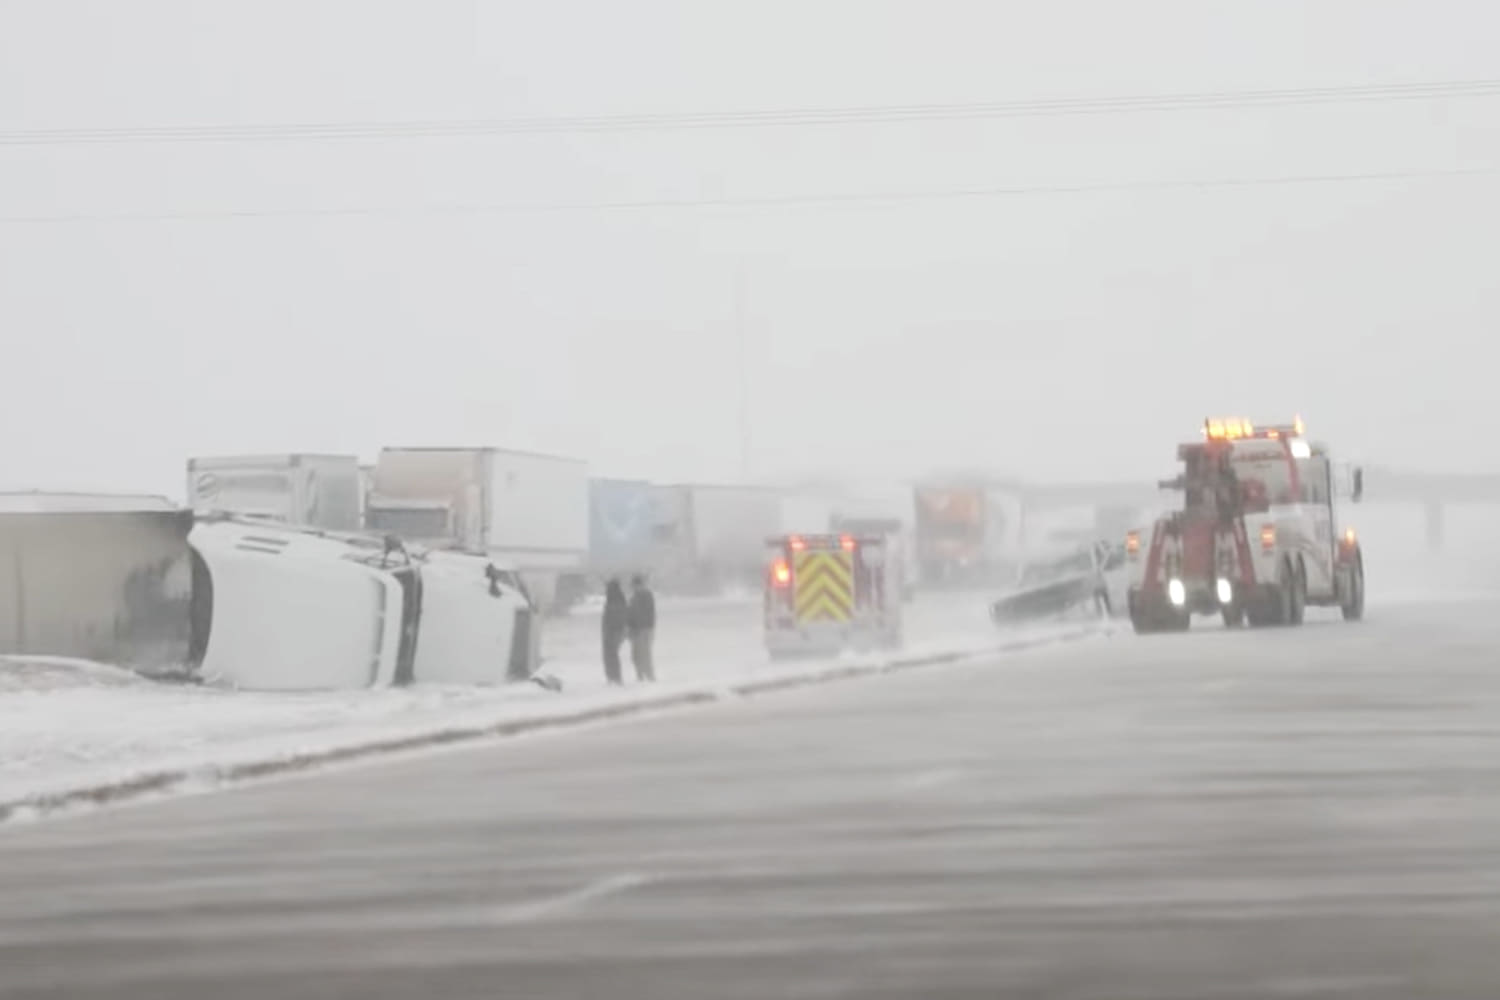 Blizzard conditions roll through Northern and Central plains, snarling post-Christmas travel 1